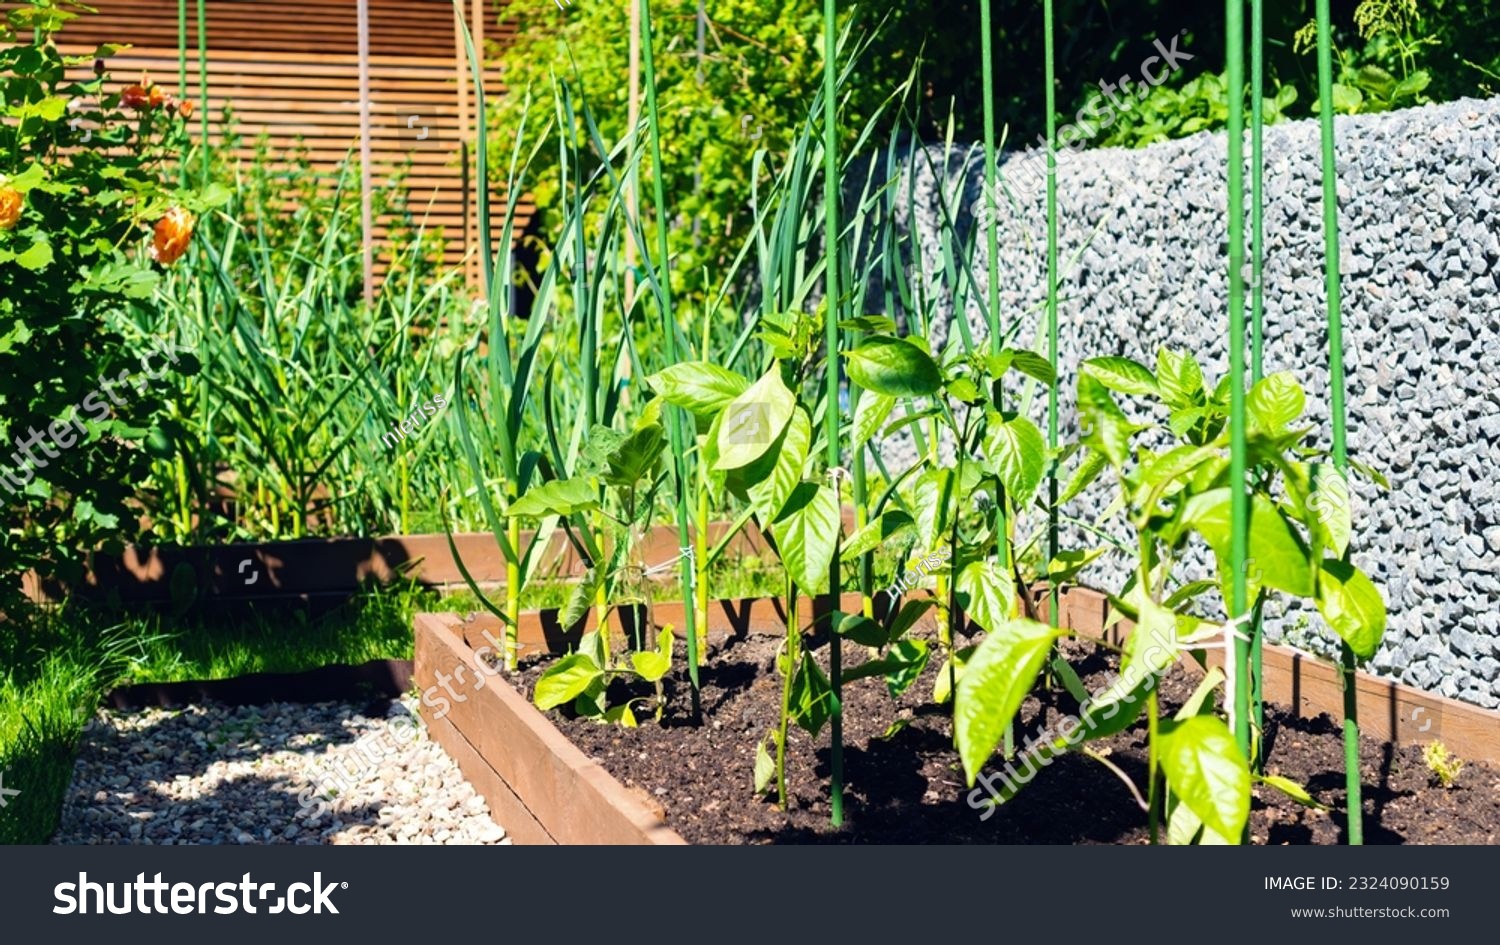 Bell pepper plants grow on a wooden raised bed in a beautiful vegetable garden. Growing plants on plastic supports stakes. Beautiful home garden with organic vegetables. Staking peppers ideas.